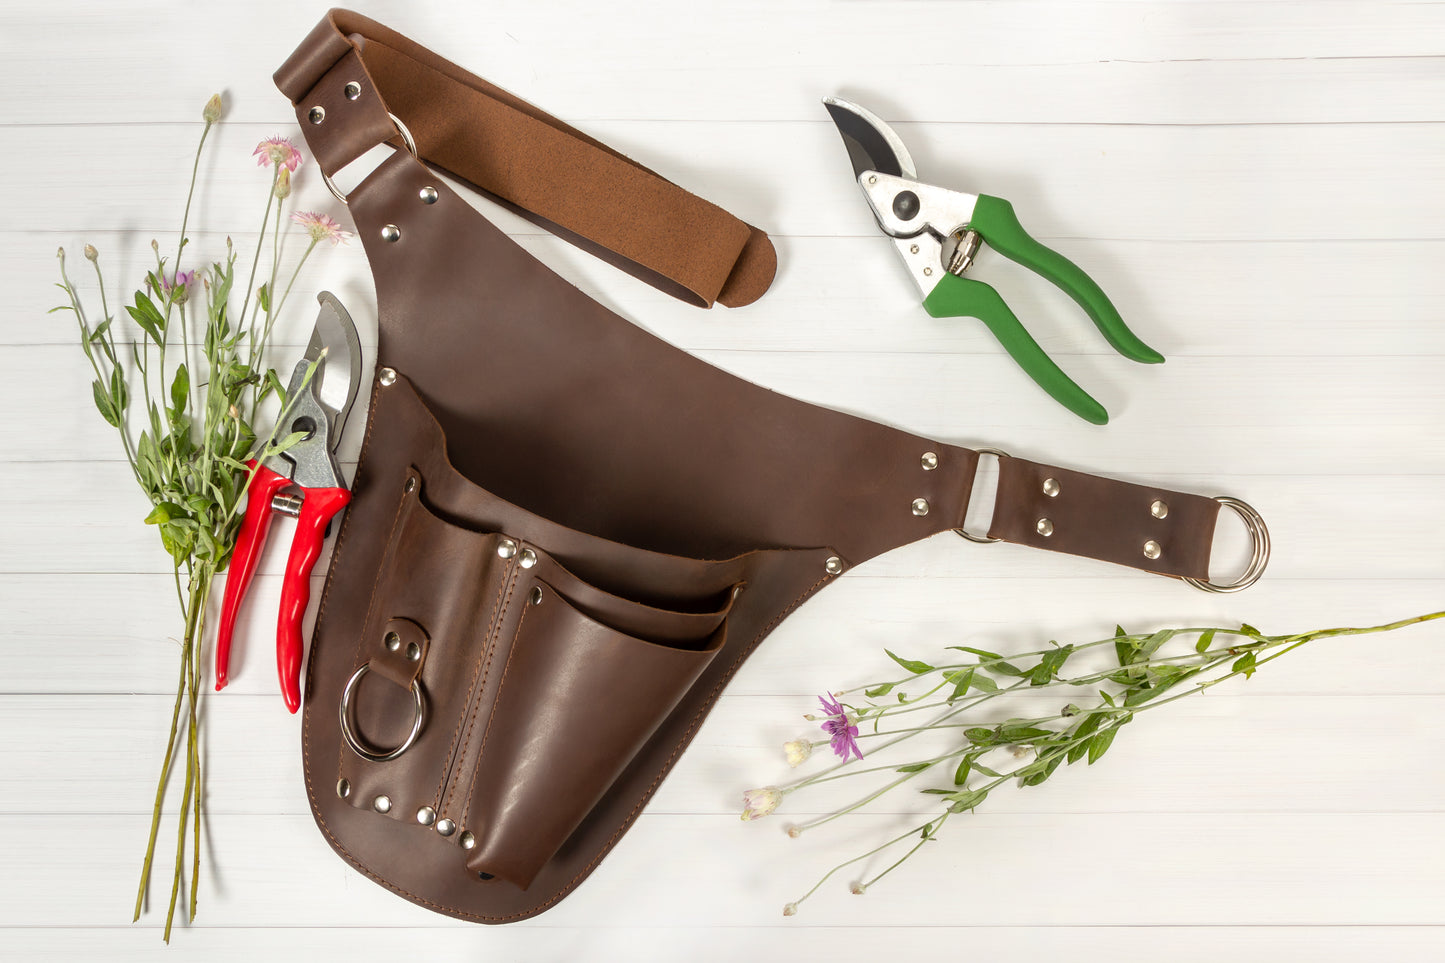 Leather Tool Belt with Phone Pocket For Florists Gardeners Farmers Personalized